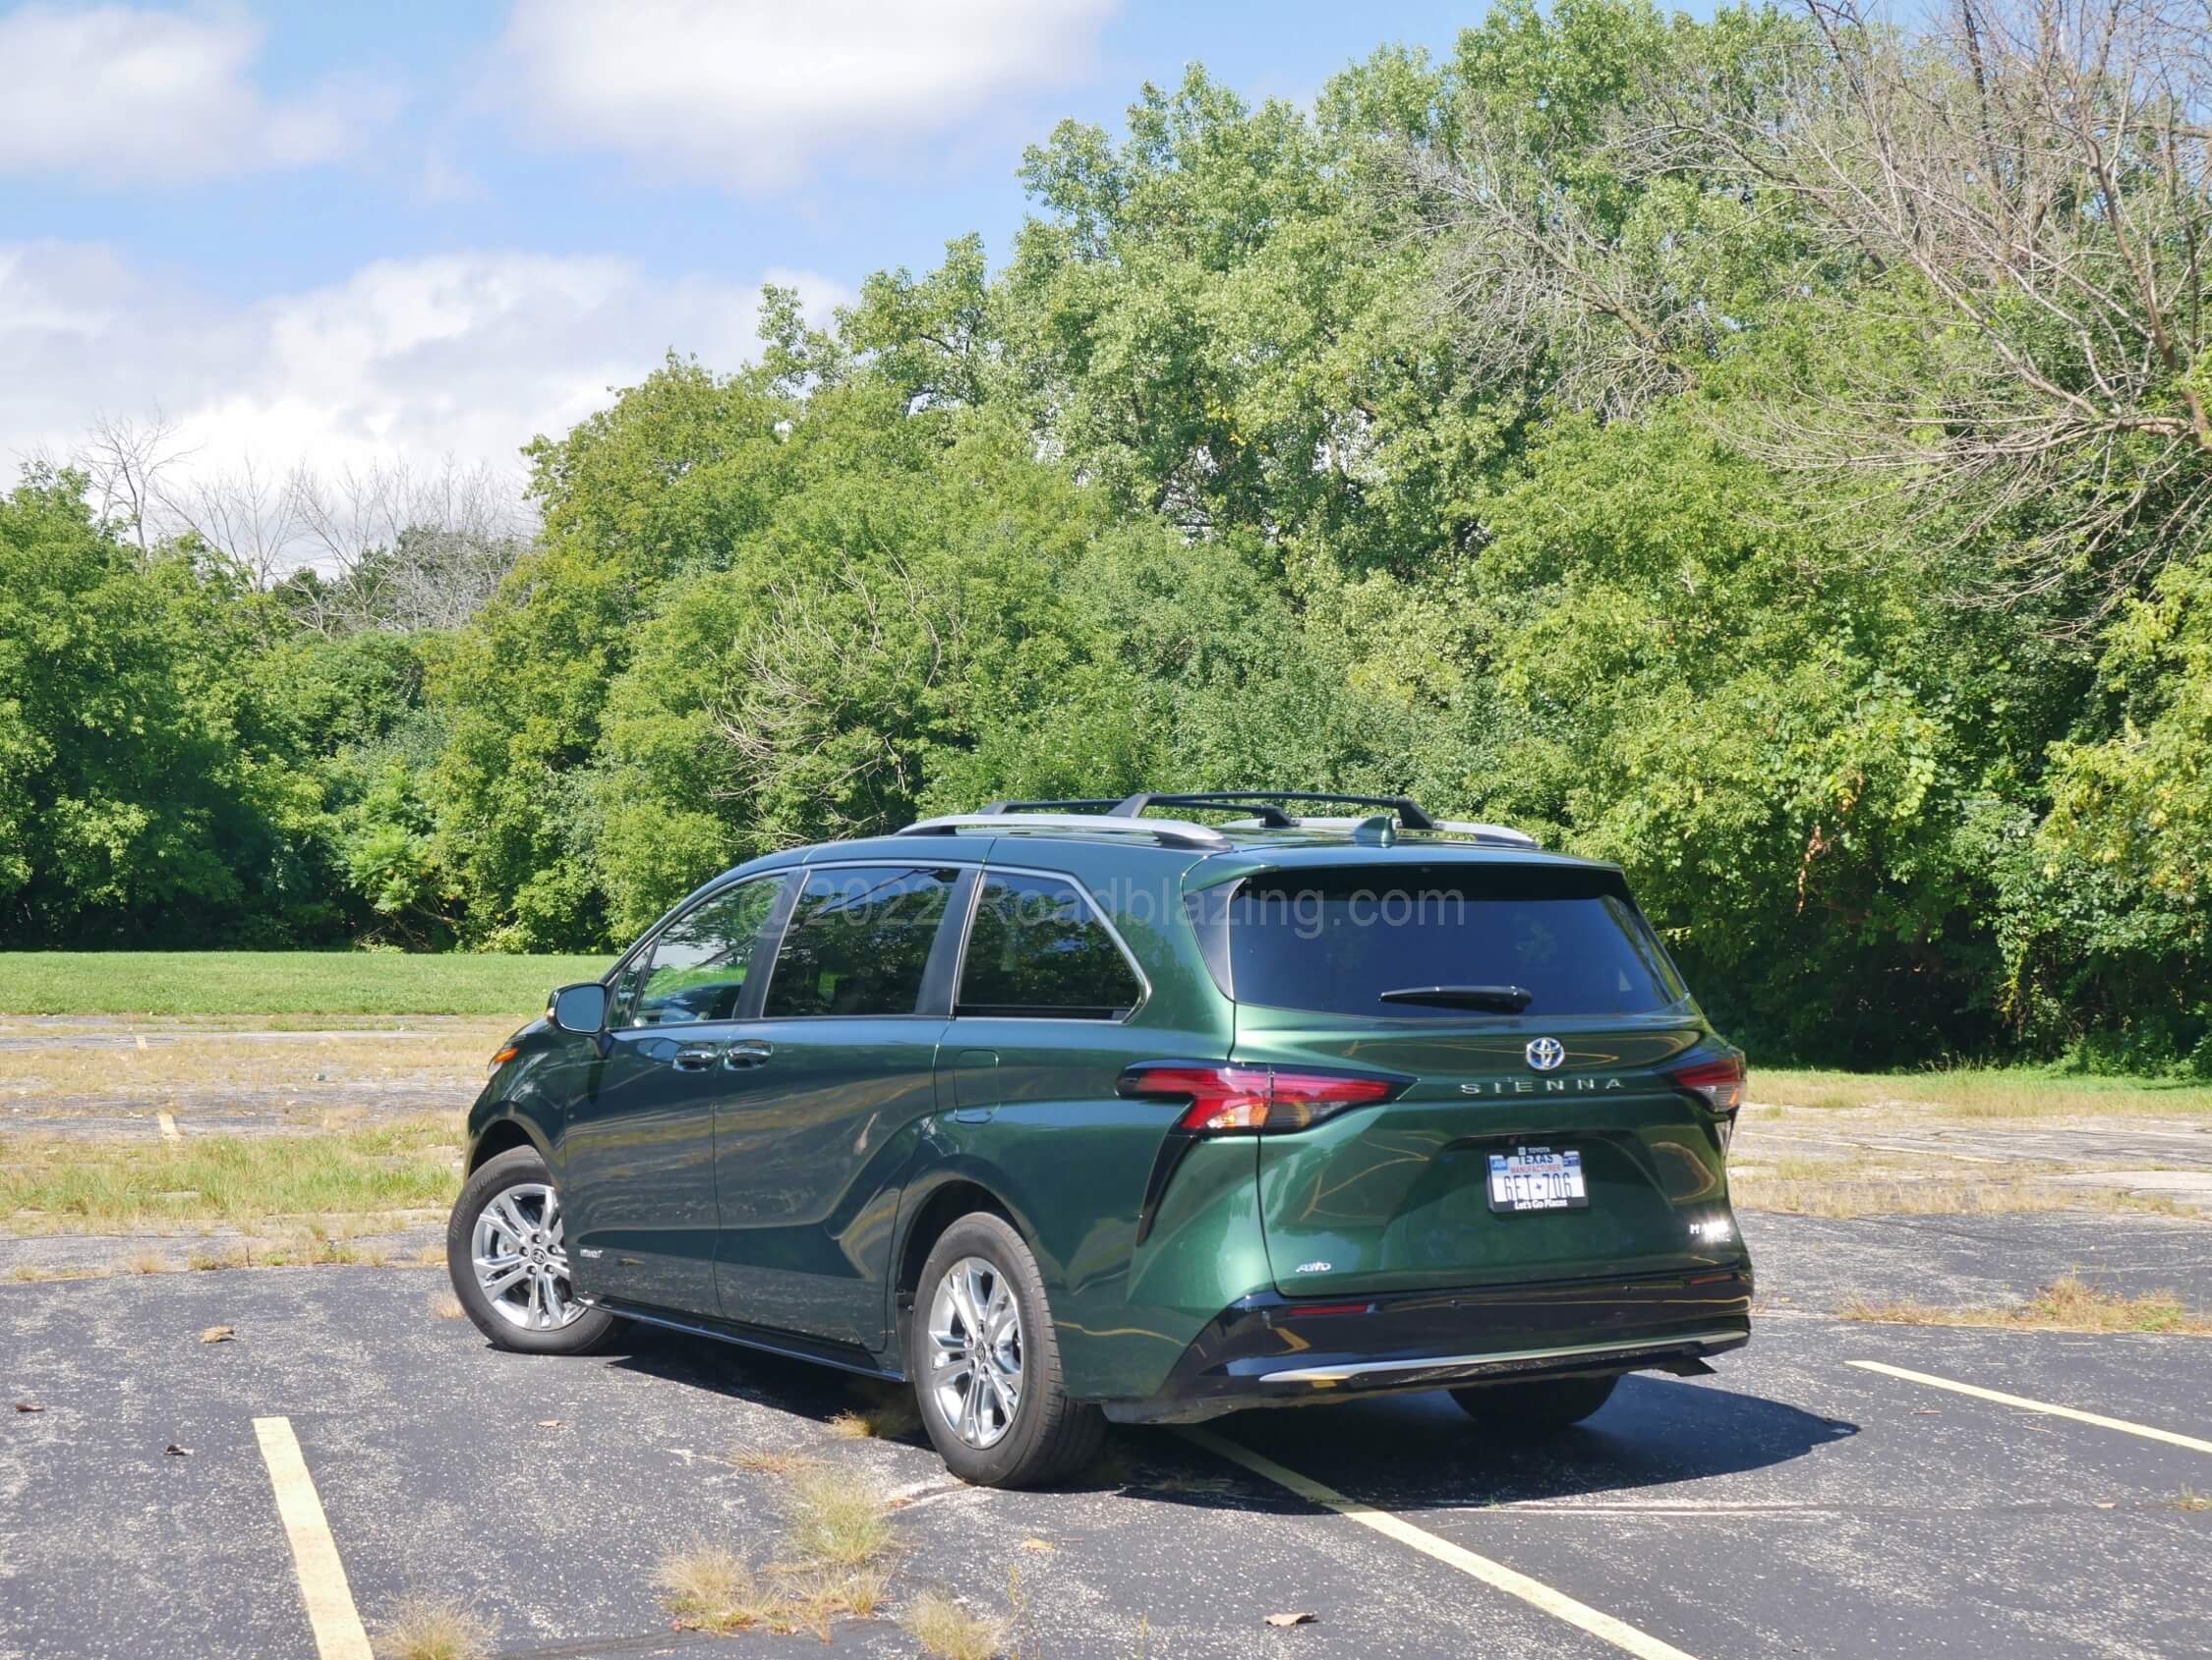 2021 Toyota Sienna Hybrid Platinum AWD: Haughtier rear quarter haunches are followed by more prominent boomerang taillights